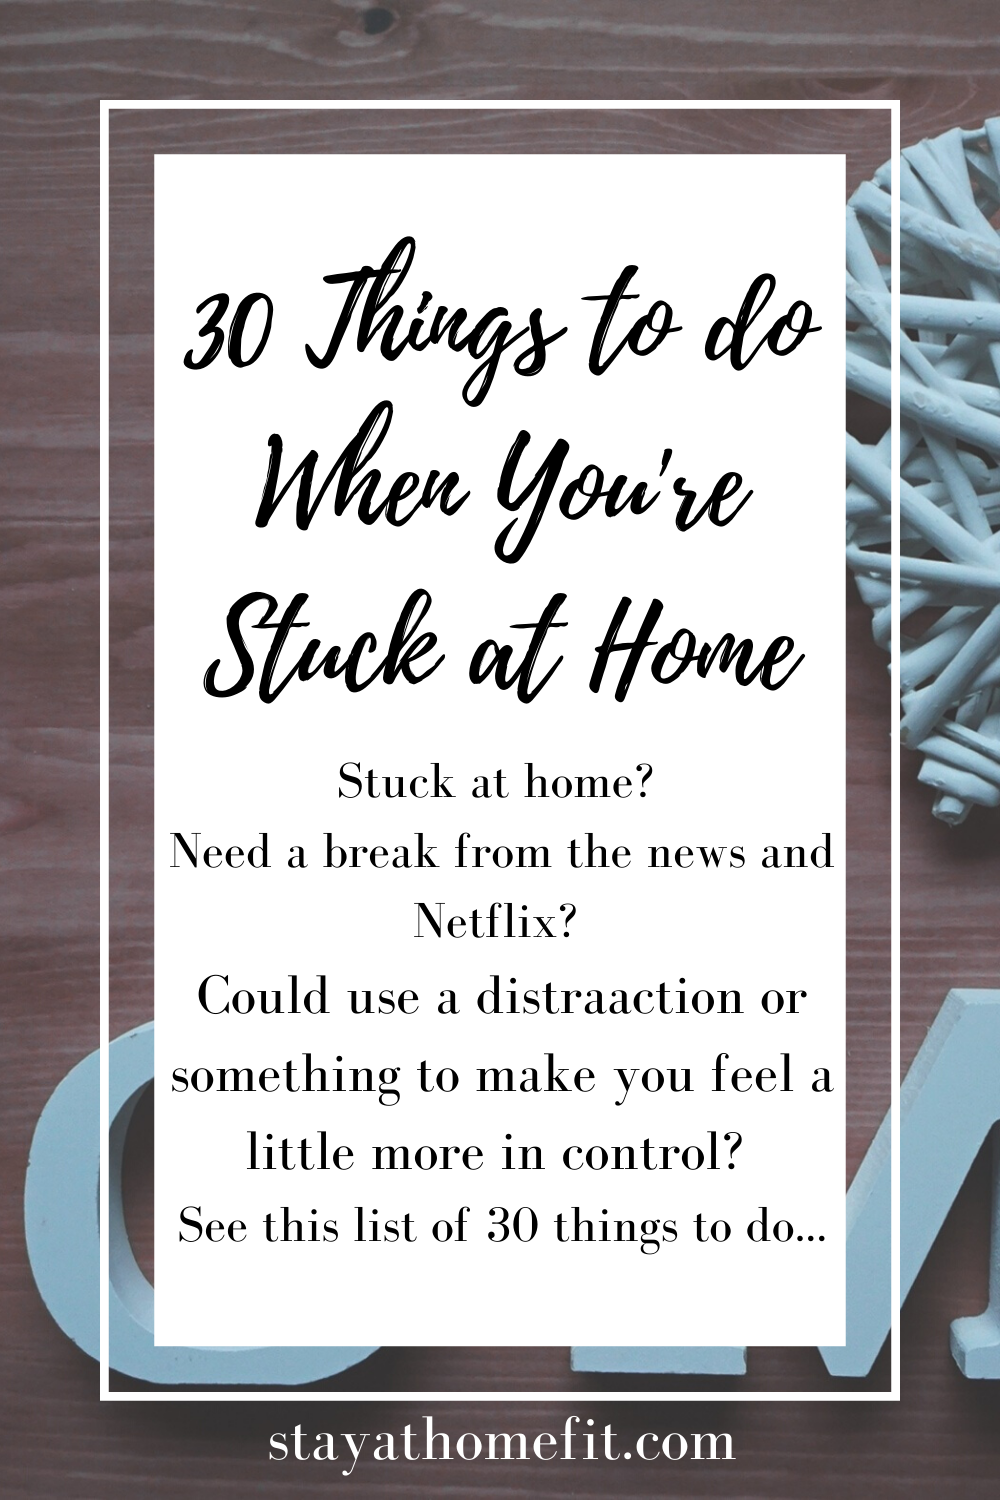 30 Things to do when you're stuck at home